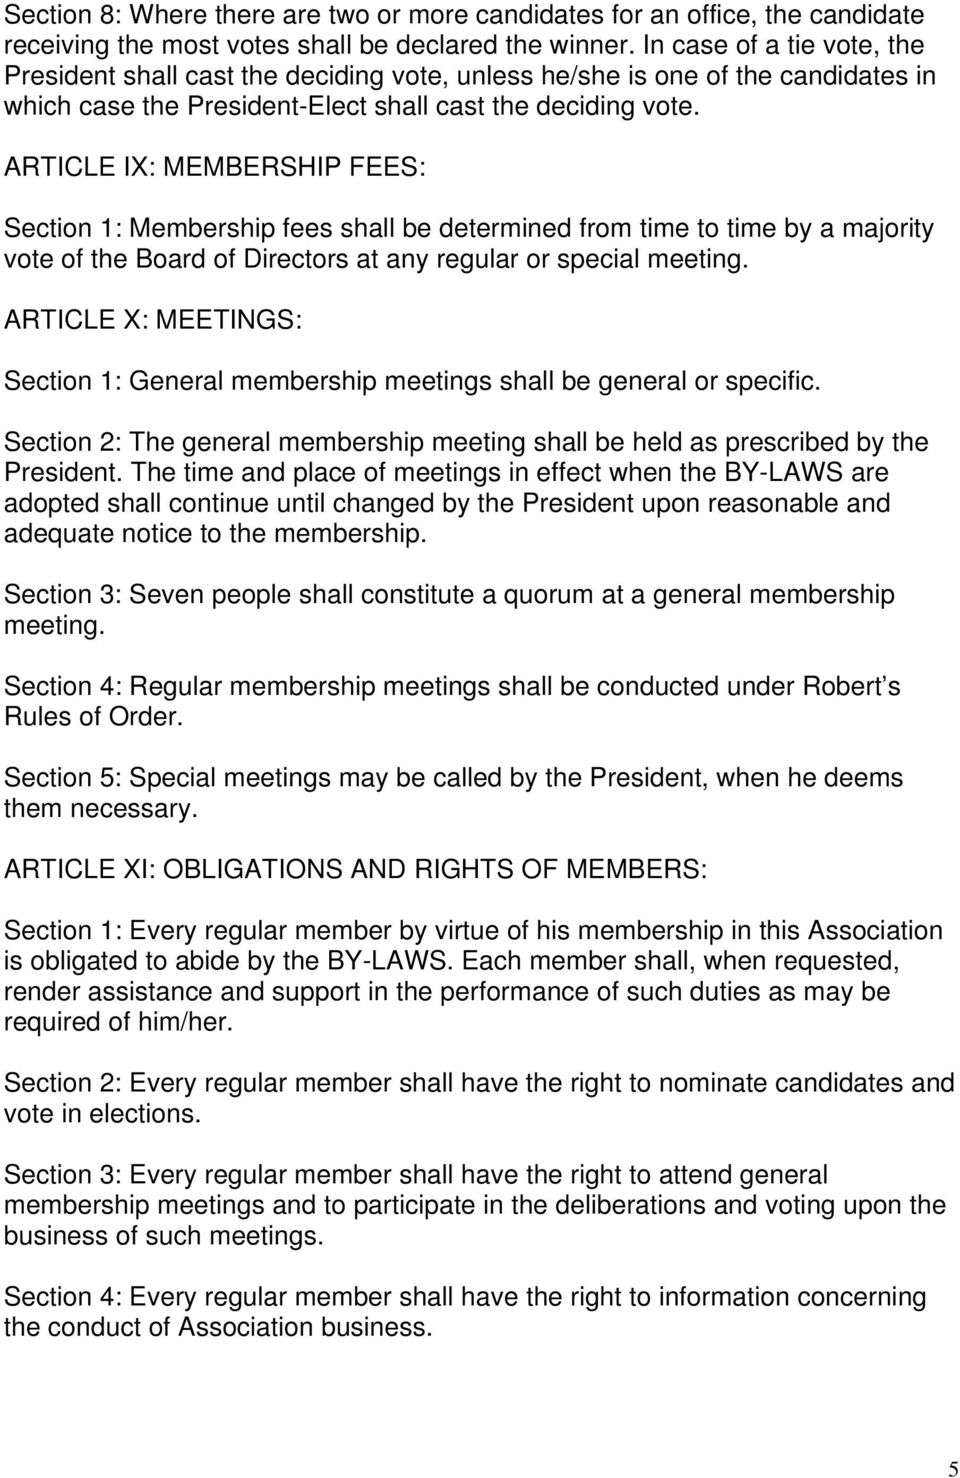 ARTICLE IX: MEMBERSHIP FEES: Section 1: Membership fees shall be determined from time to time by a majority vote of the Board of Directors at any regular or special meeting.